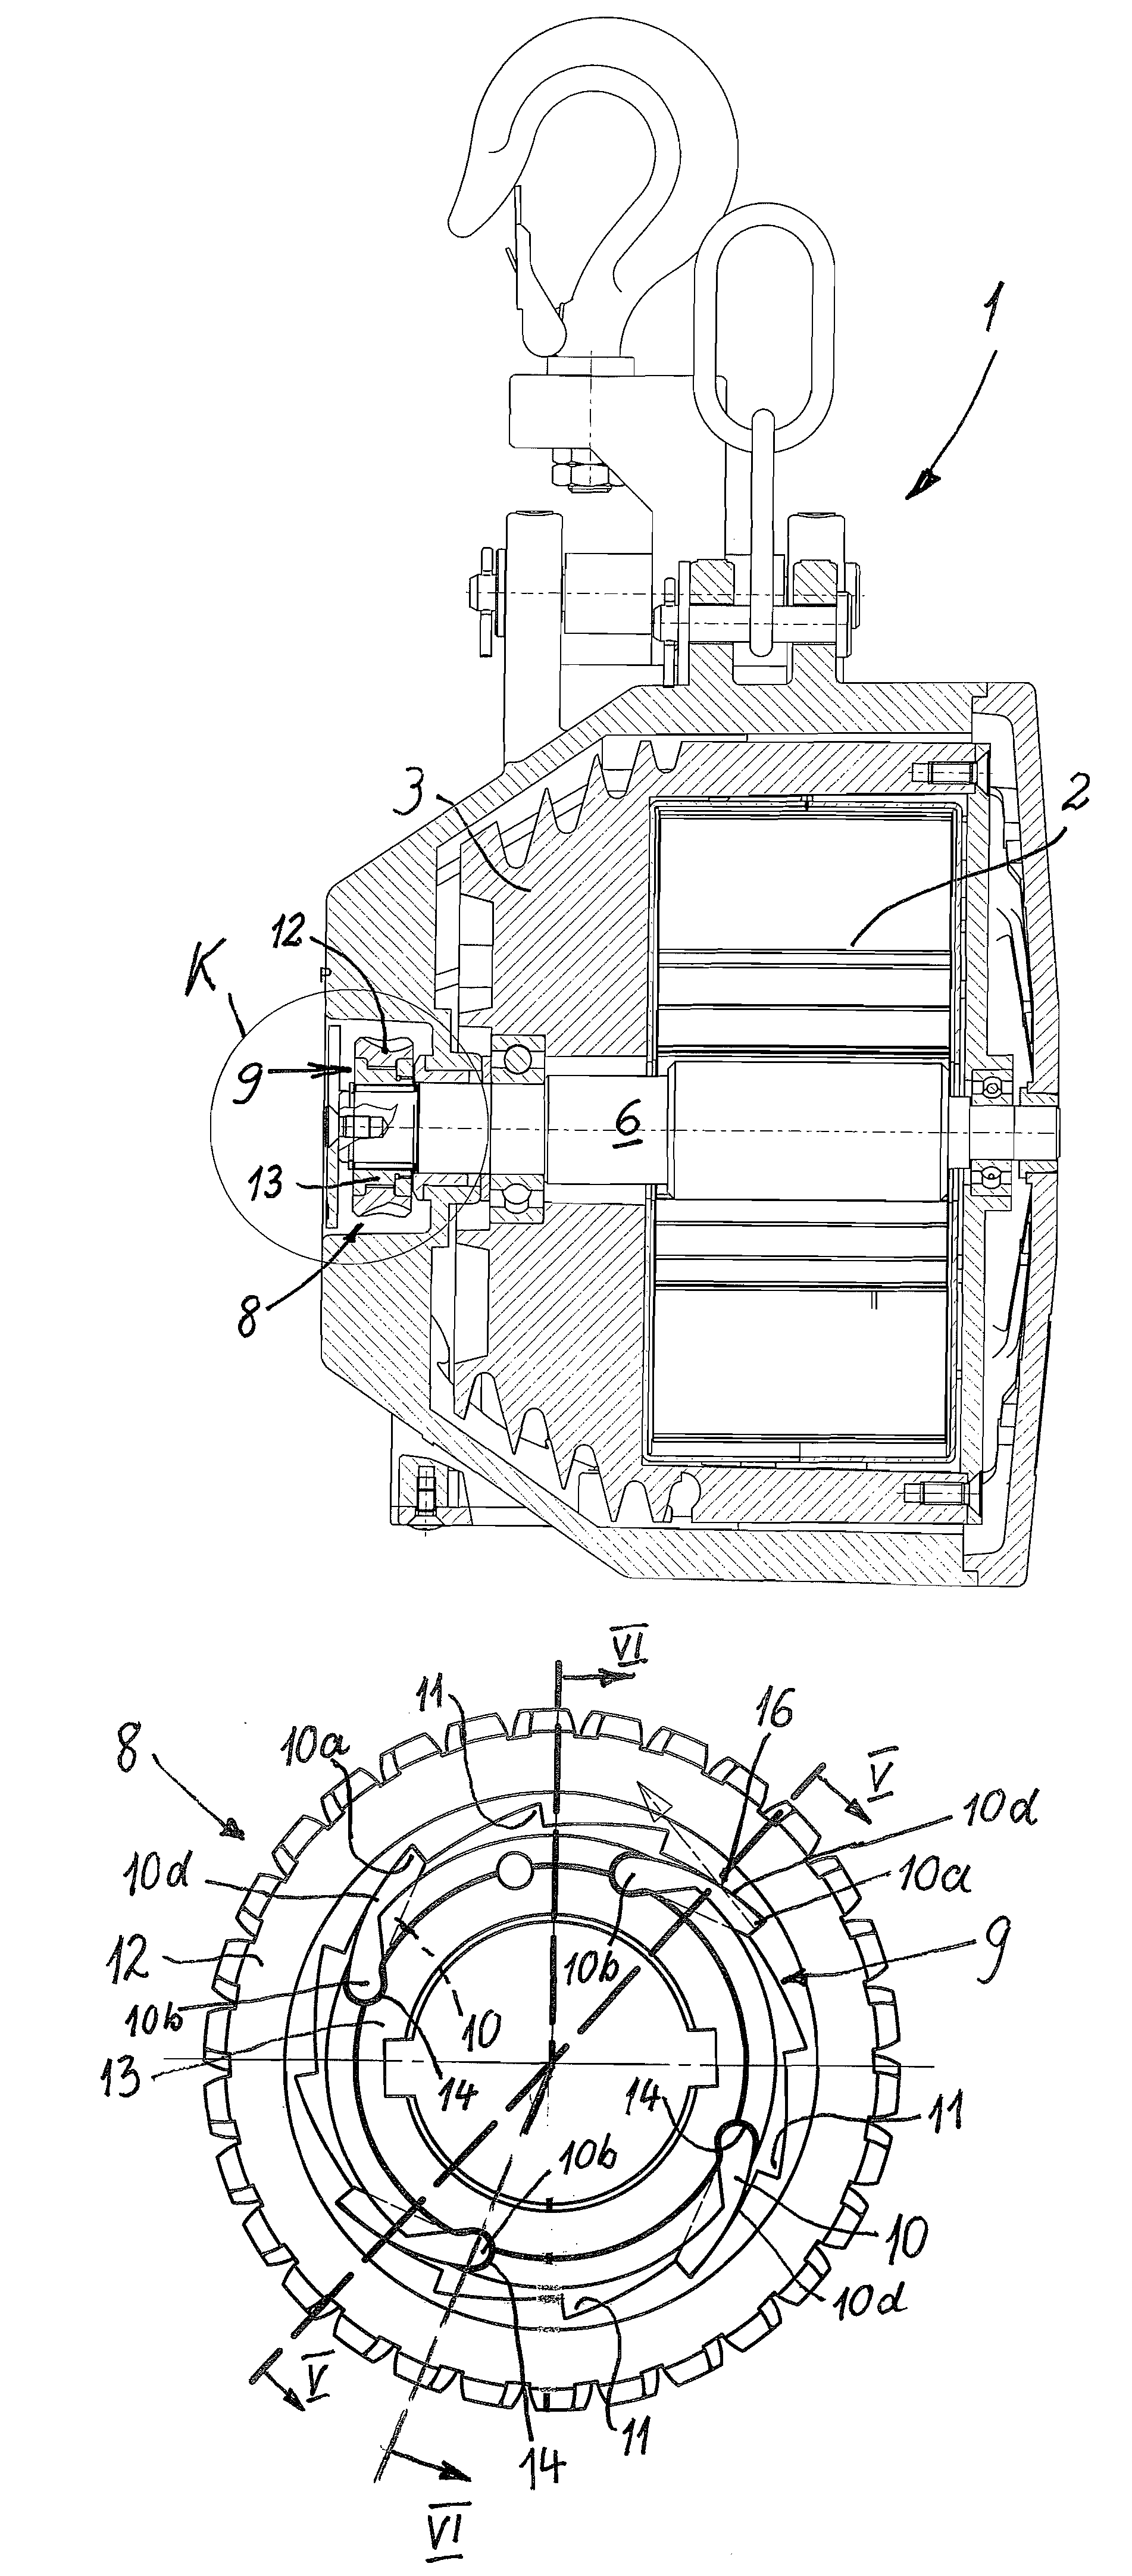 Device for compensating the weight of a suspended load